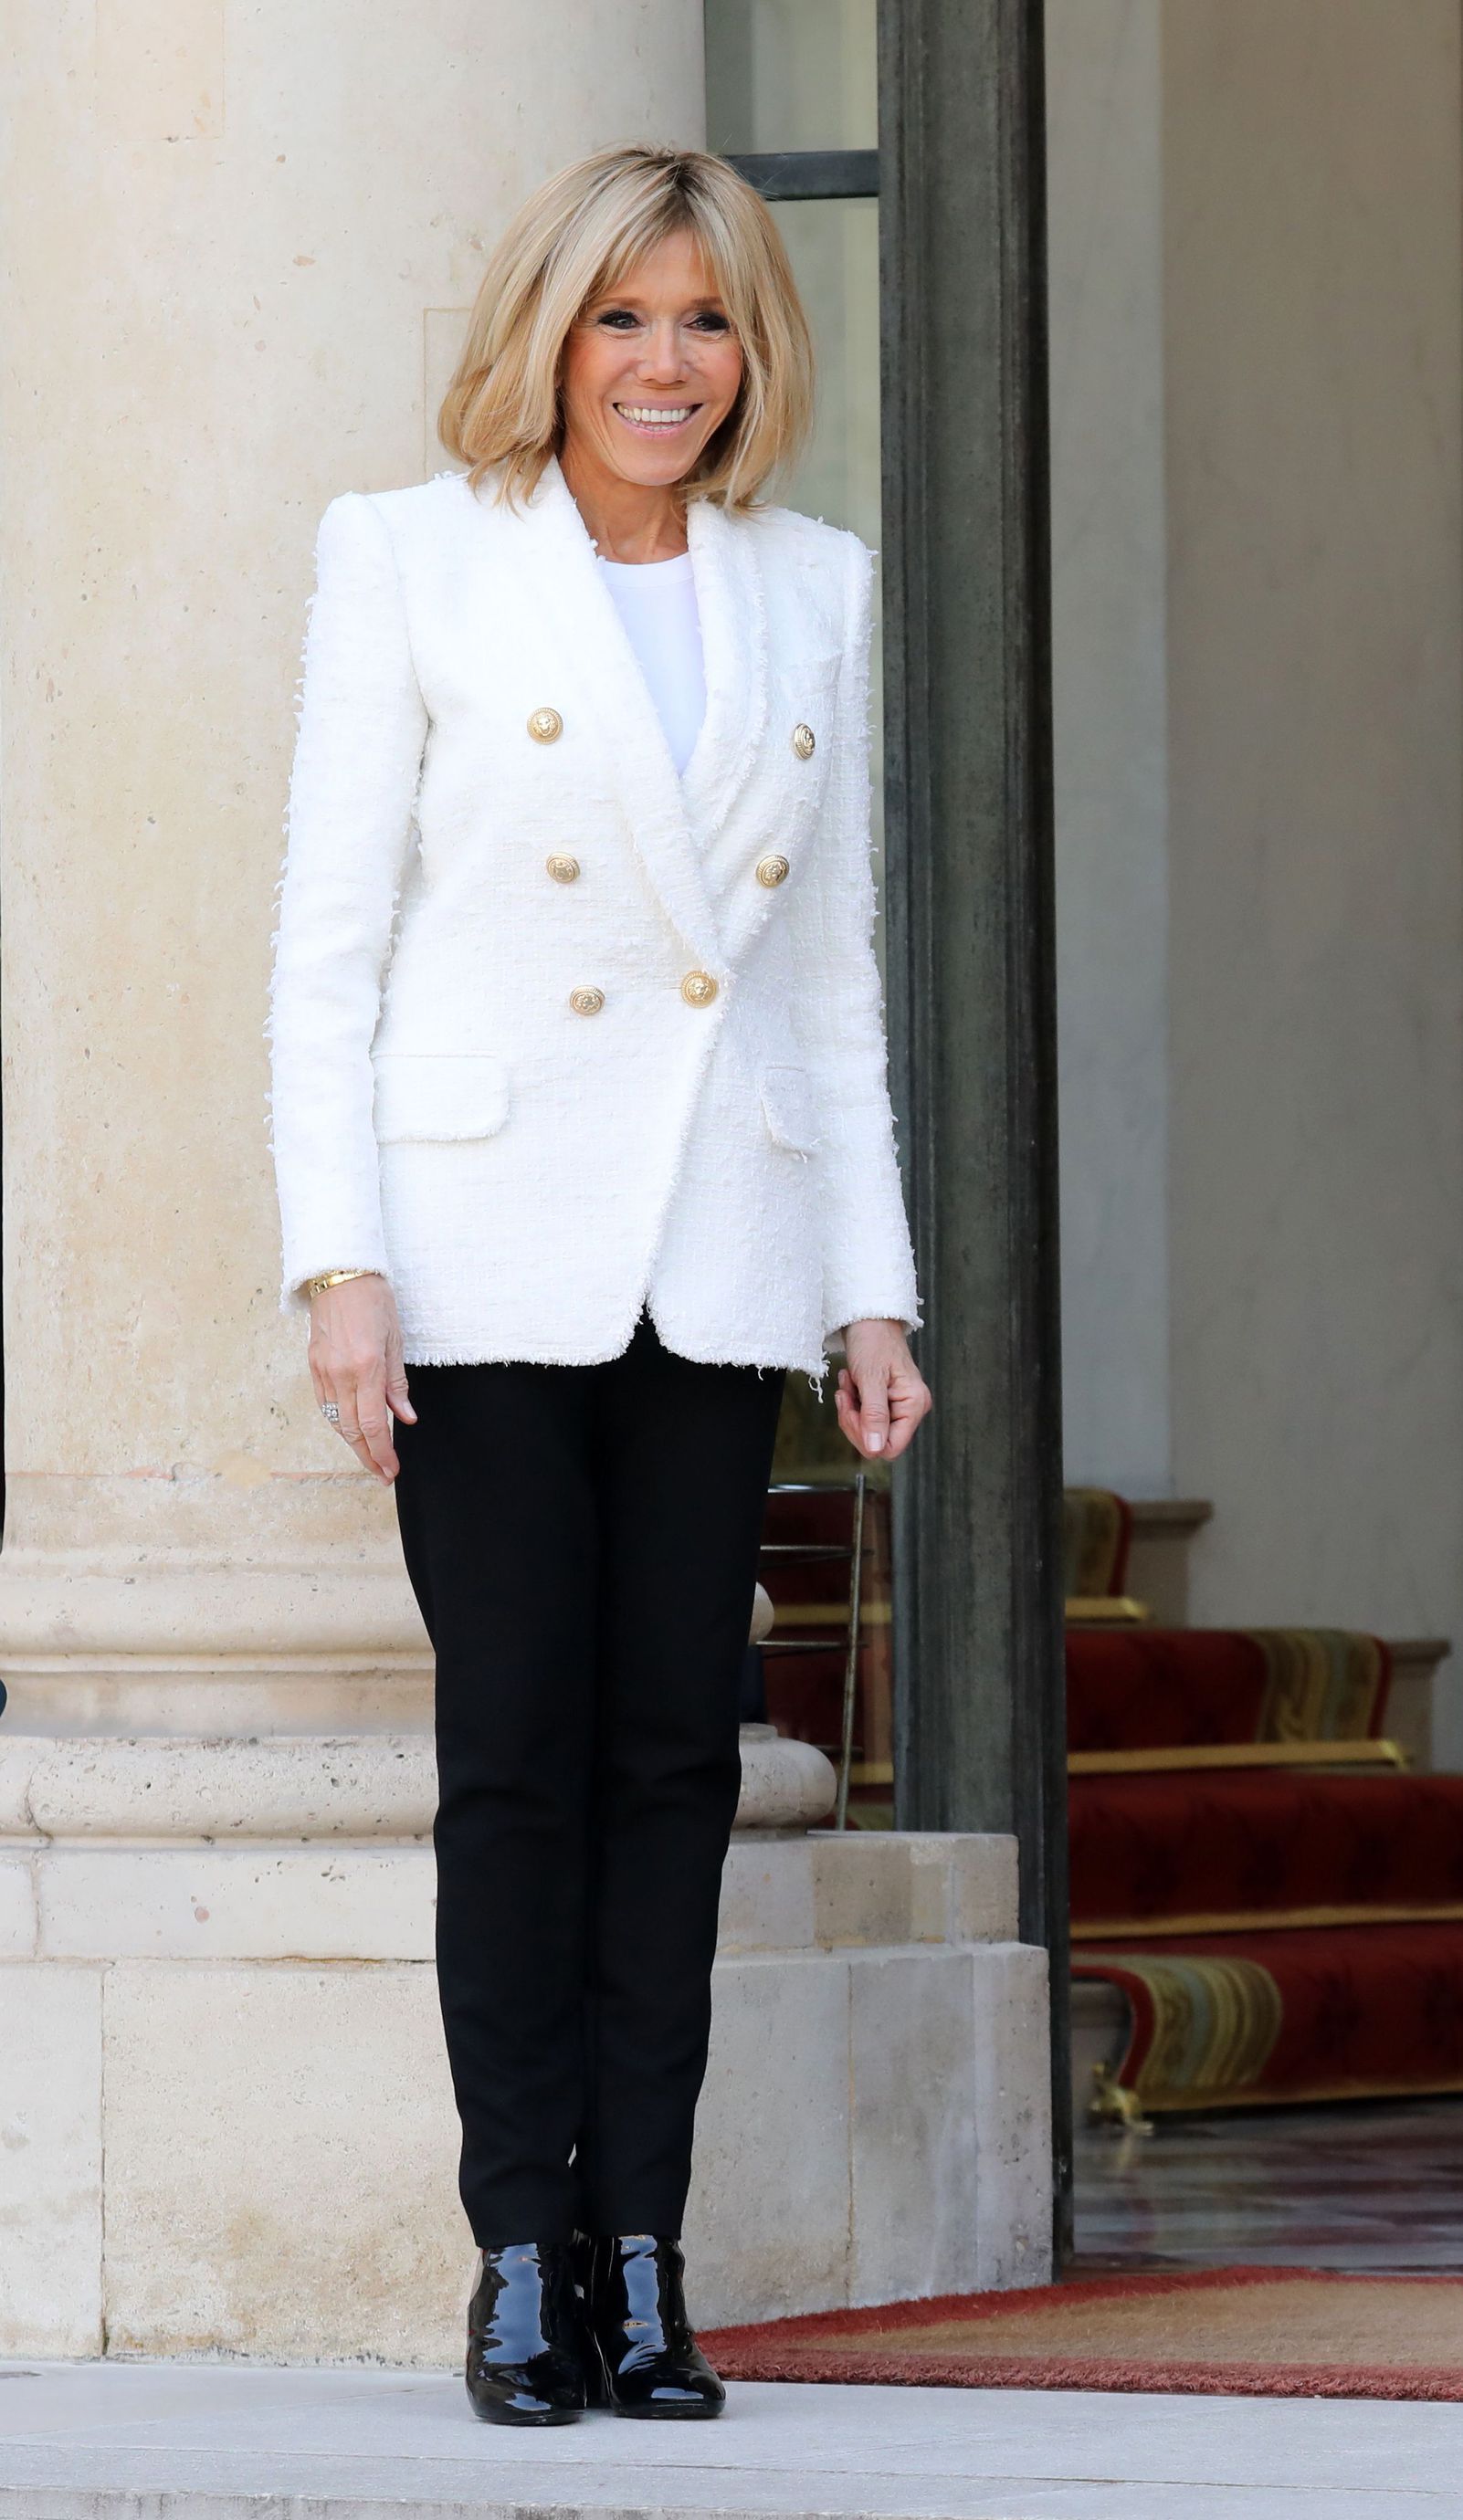 plukke slids Compulsion Brigitte Trogneux's Best Looks - The French First Lady's Most Stylish Looks